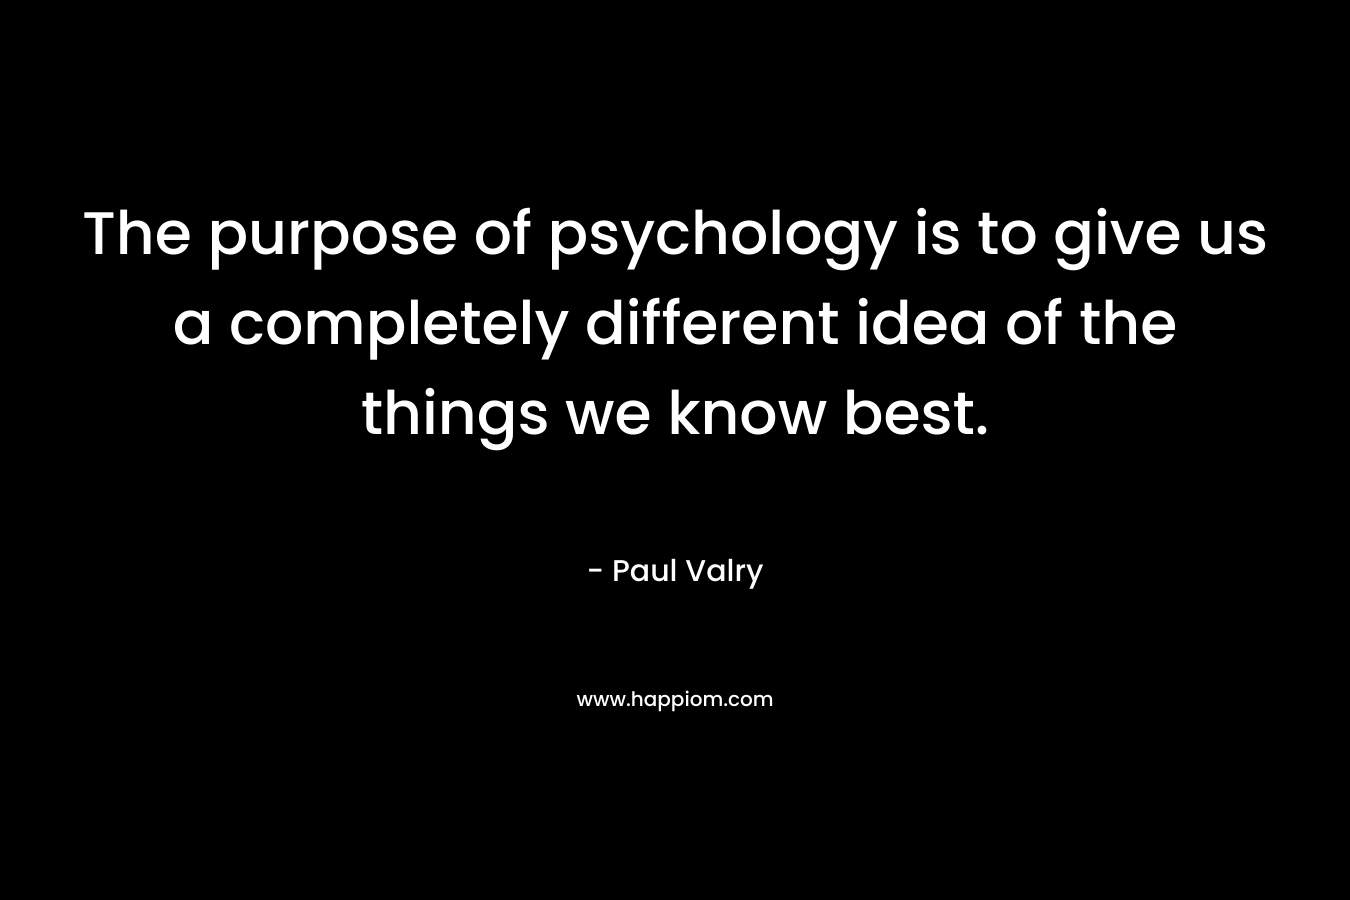 The purpose of psychology is to give us a completely different idea of the things we know best.